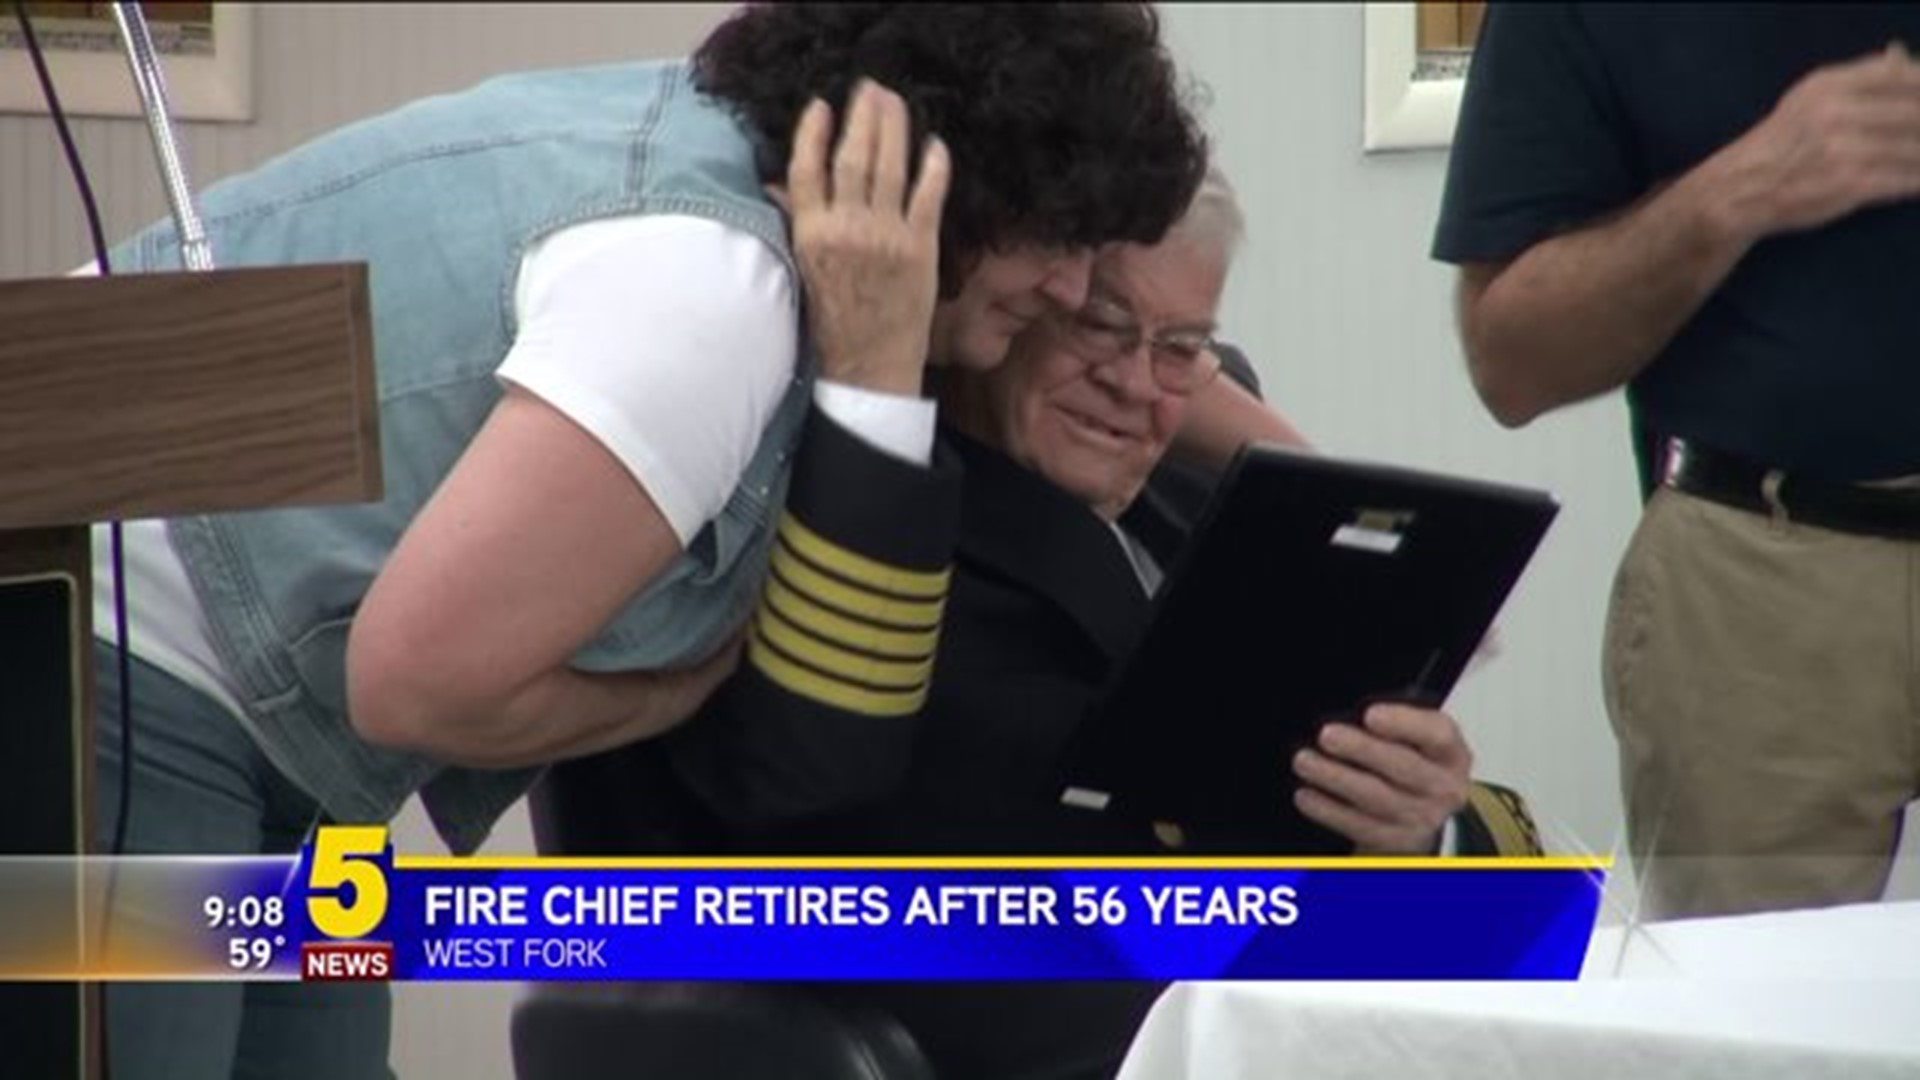 West Fork Fire Chief Retires